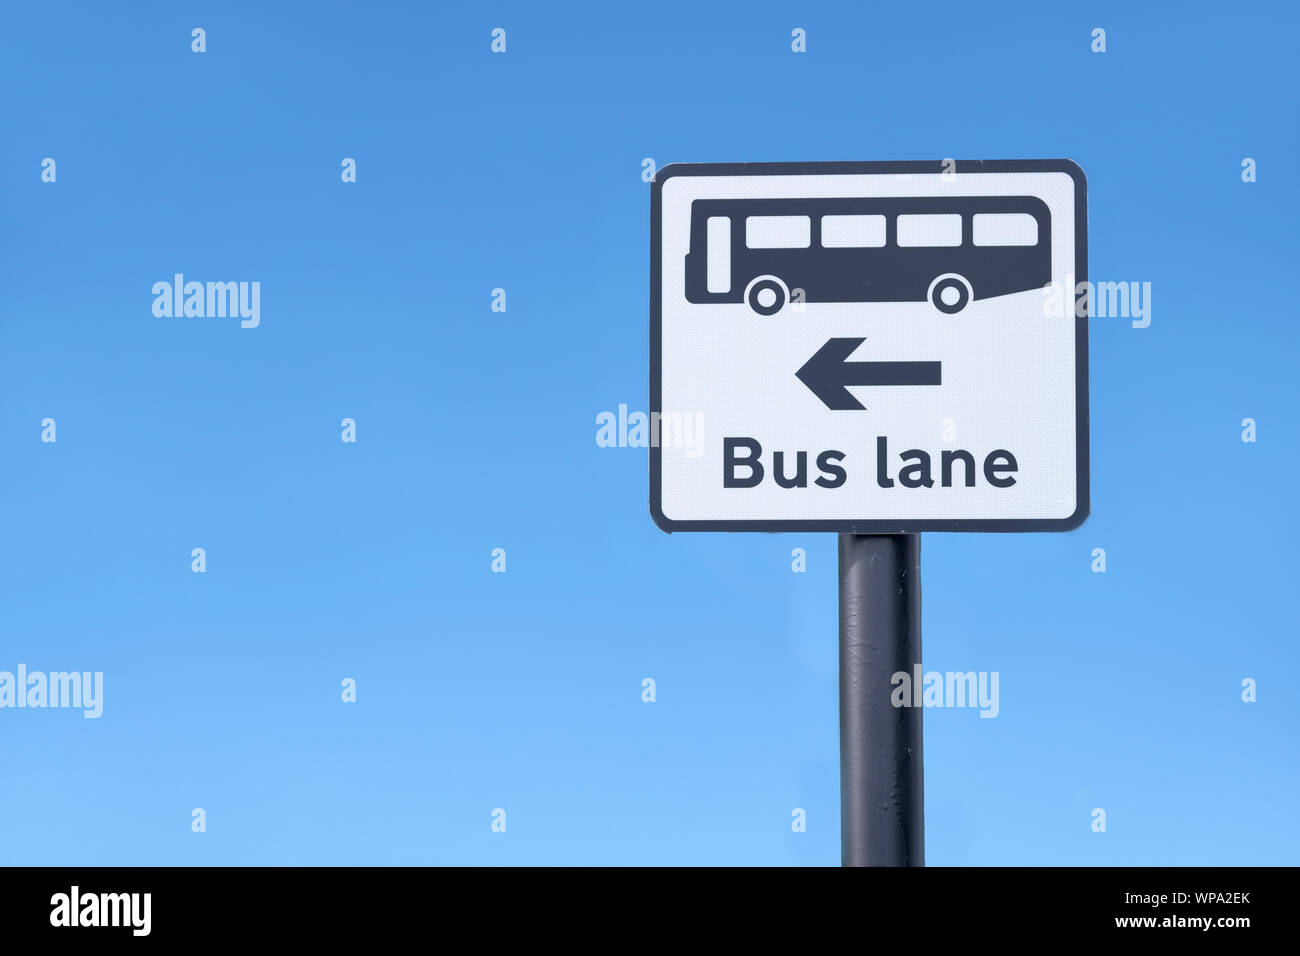 Bus lane symbol sign and direction arrow against blue sky uk Stock Photo